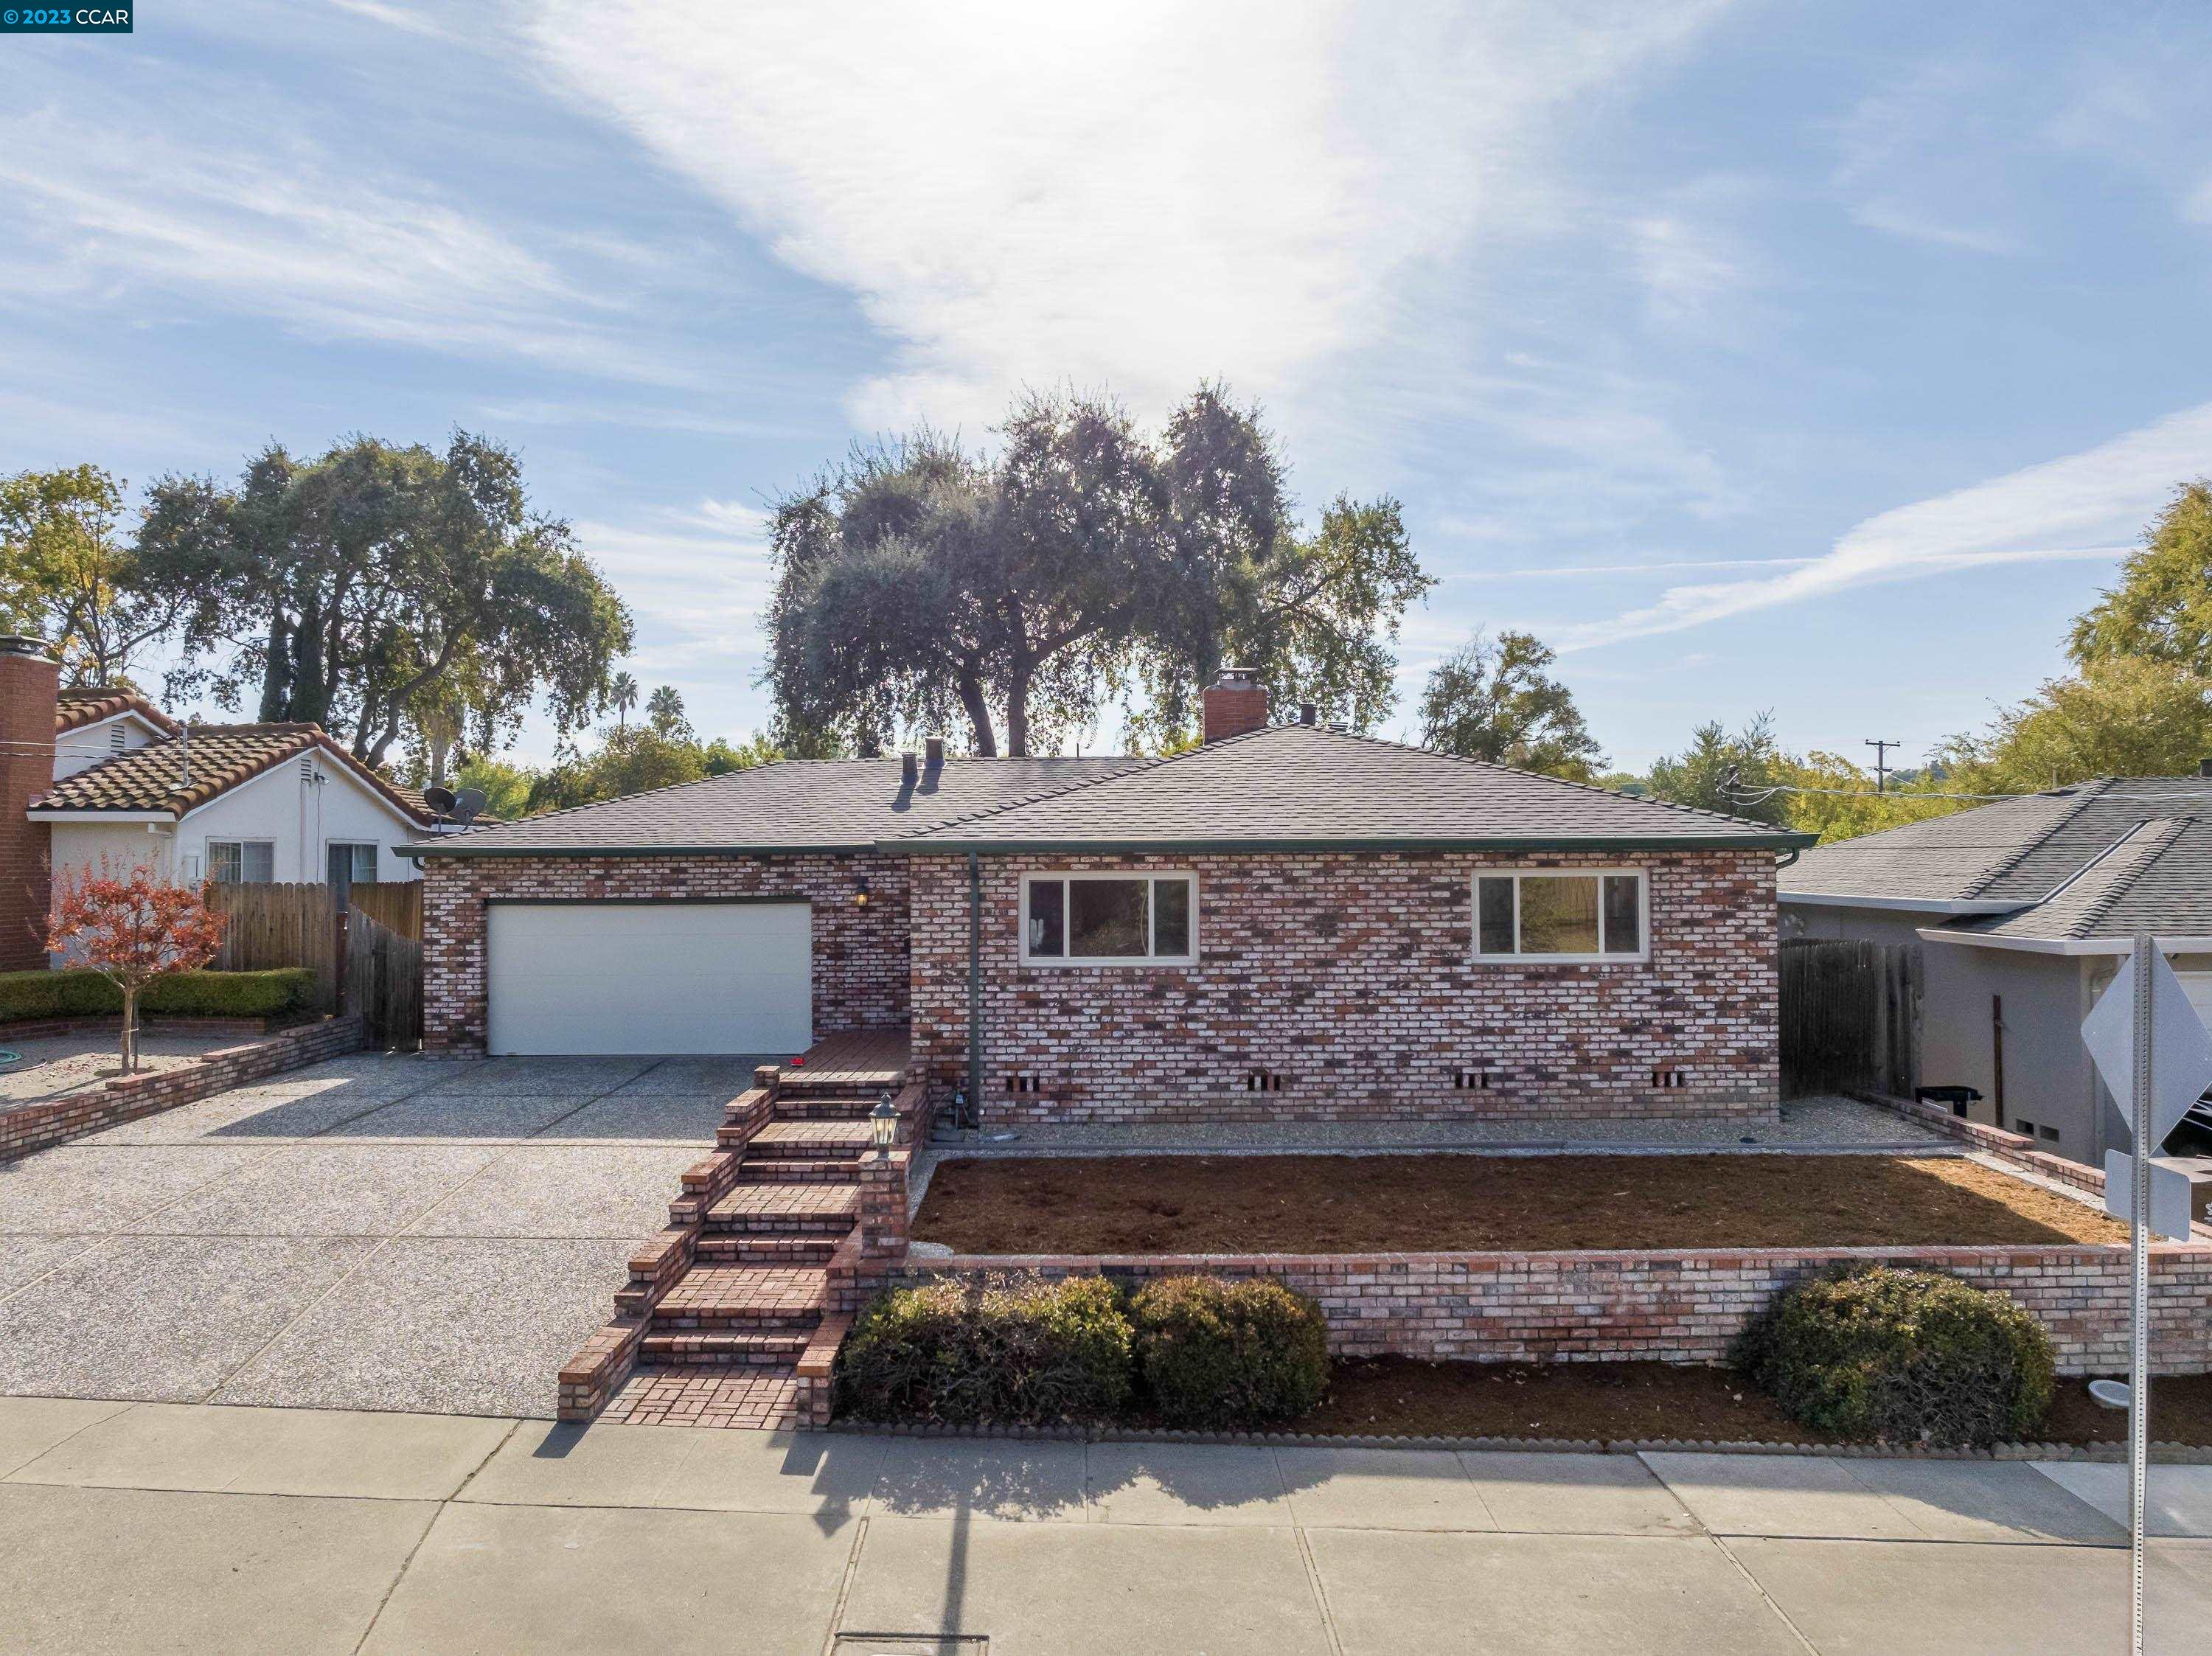 41 Clearbrook Rd, Antioch, CA 